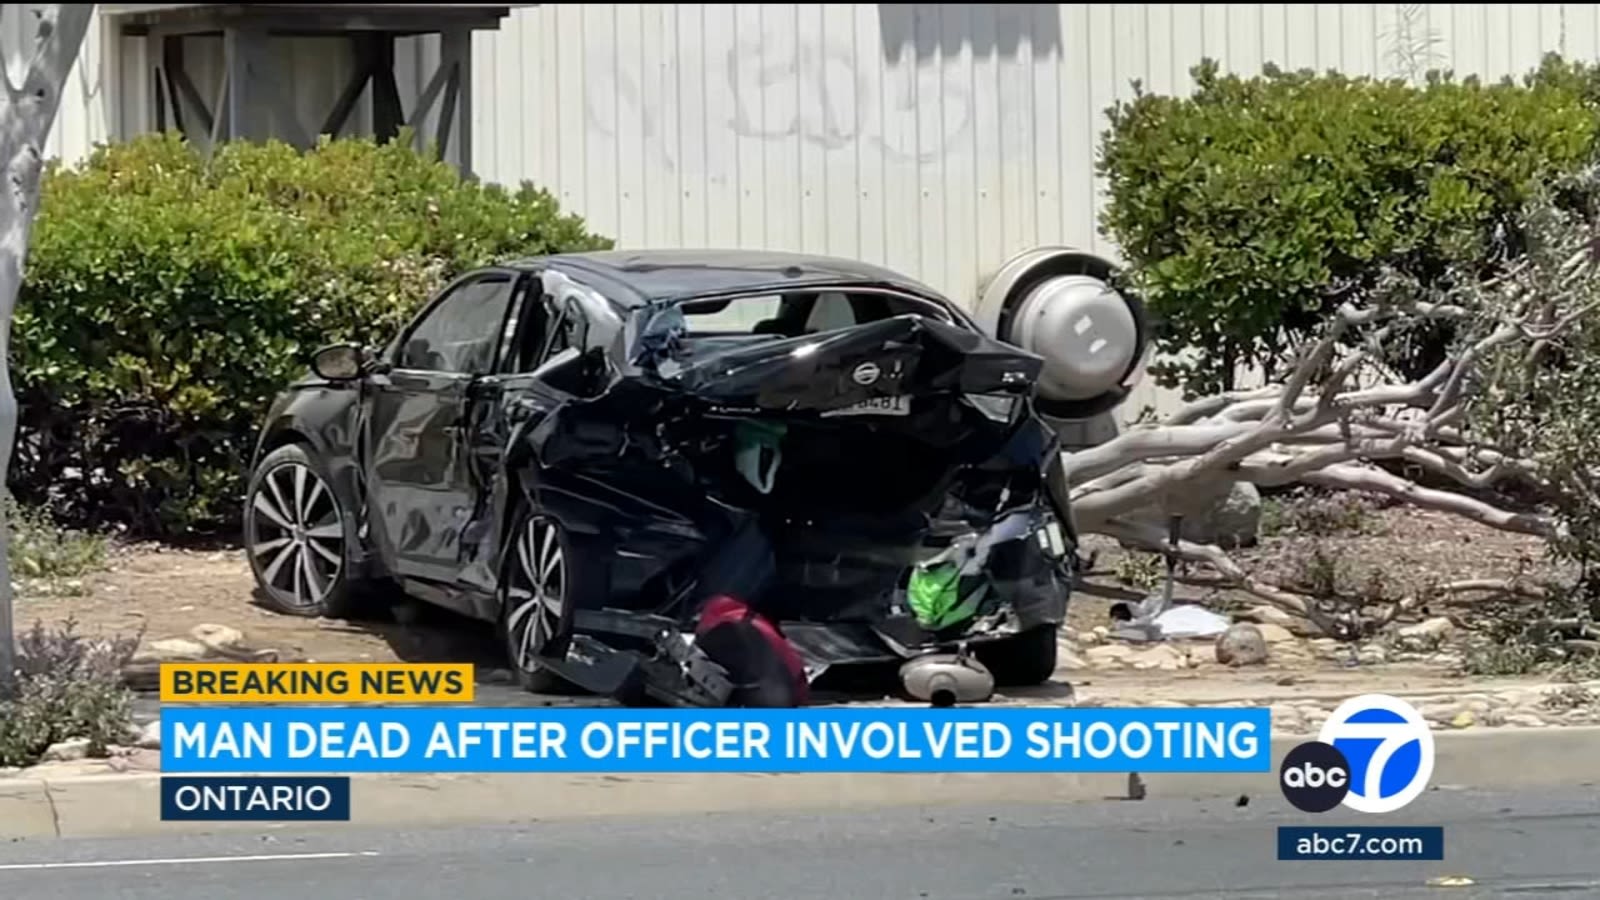 Innocent driver, suspect dead after police chase, officer-involved shooting in Ontario